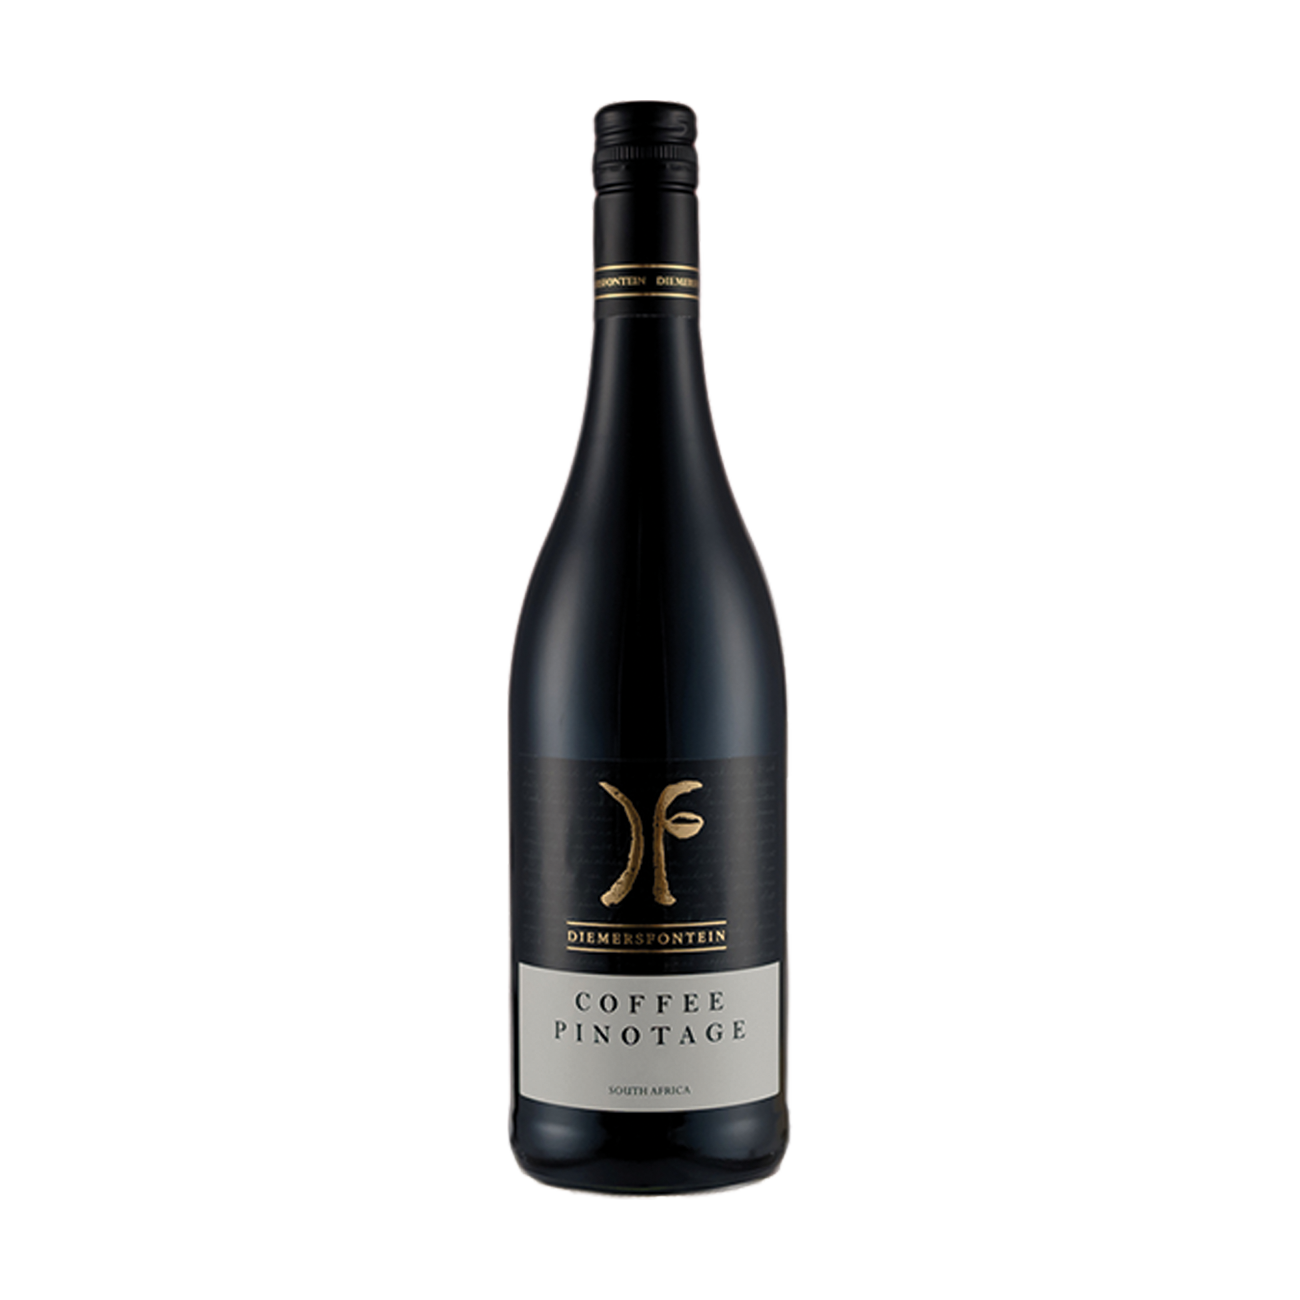 Featured image for “EXPORT PINOTAGE 2019”